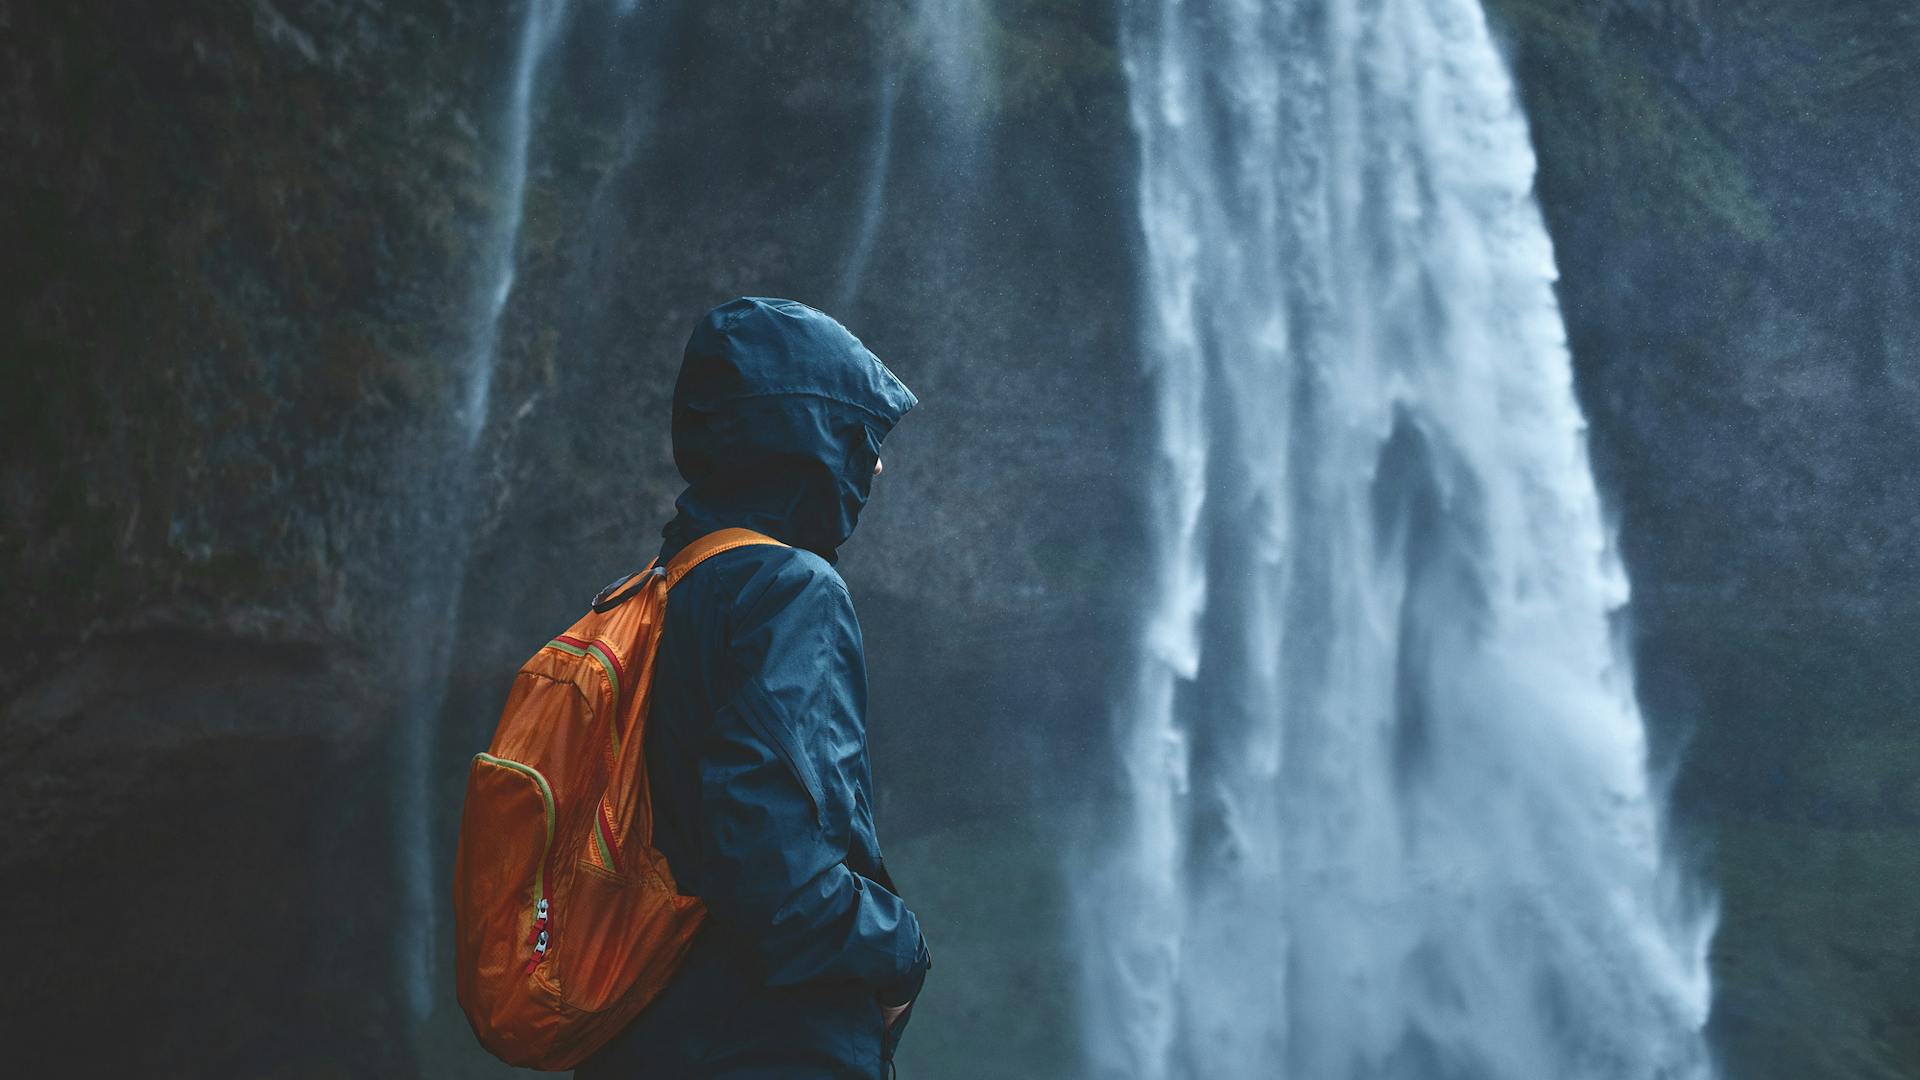 A person using a blue jacket and an orange backpack with a waterfall in the background.